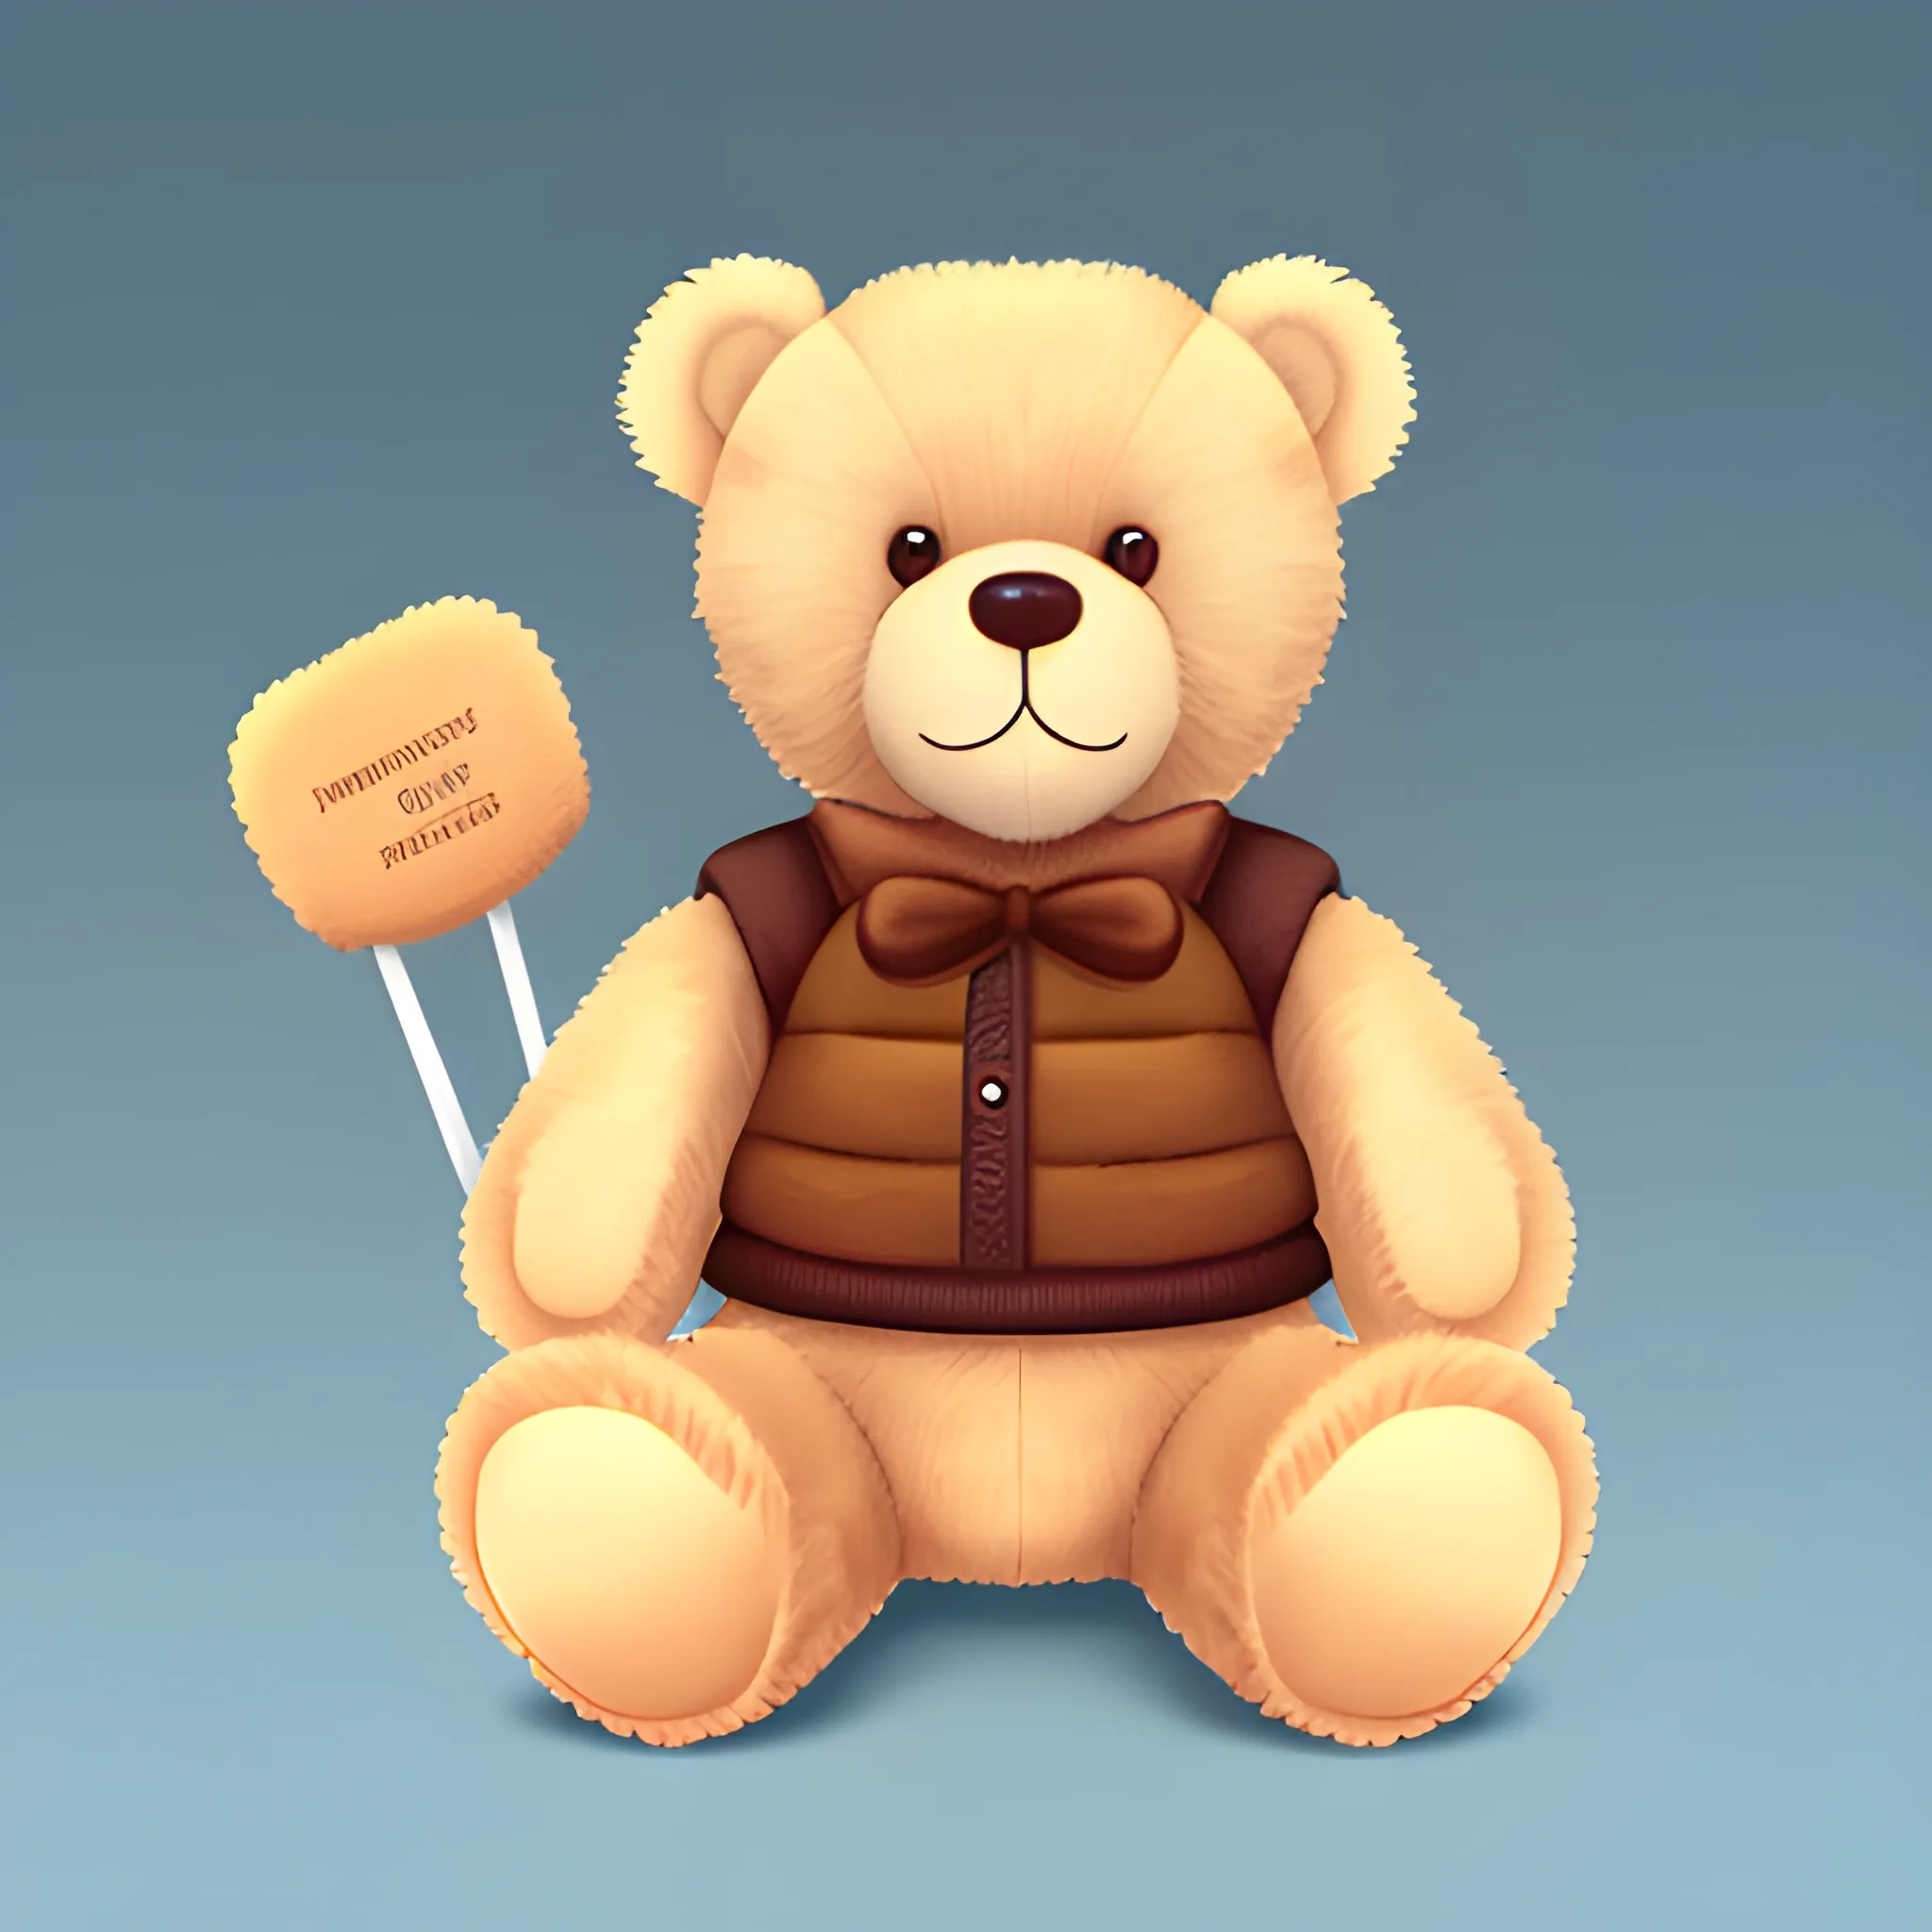 the adventurous teddy bear, various poses and expressions on white background, simple, children's book illustration stylefluffy, 6 years old, colors, short brown fur, solid color, without book, without glasses, without backpack